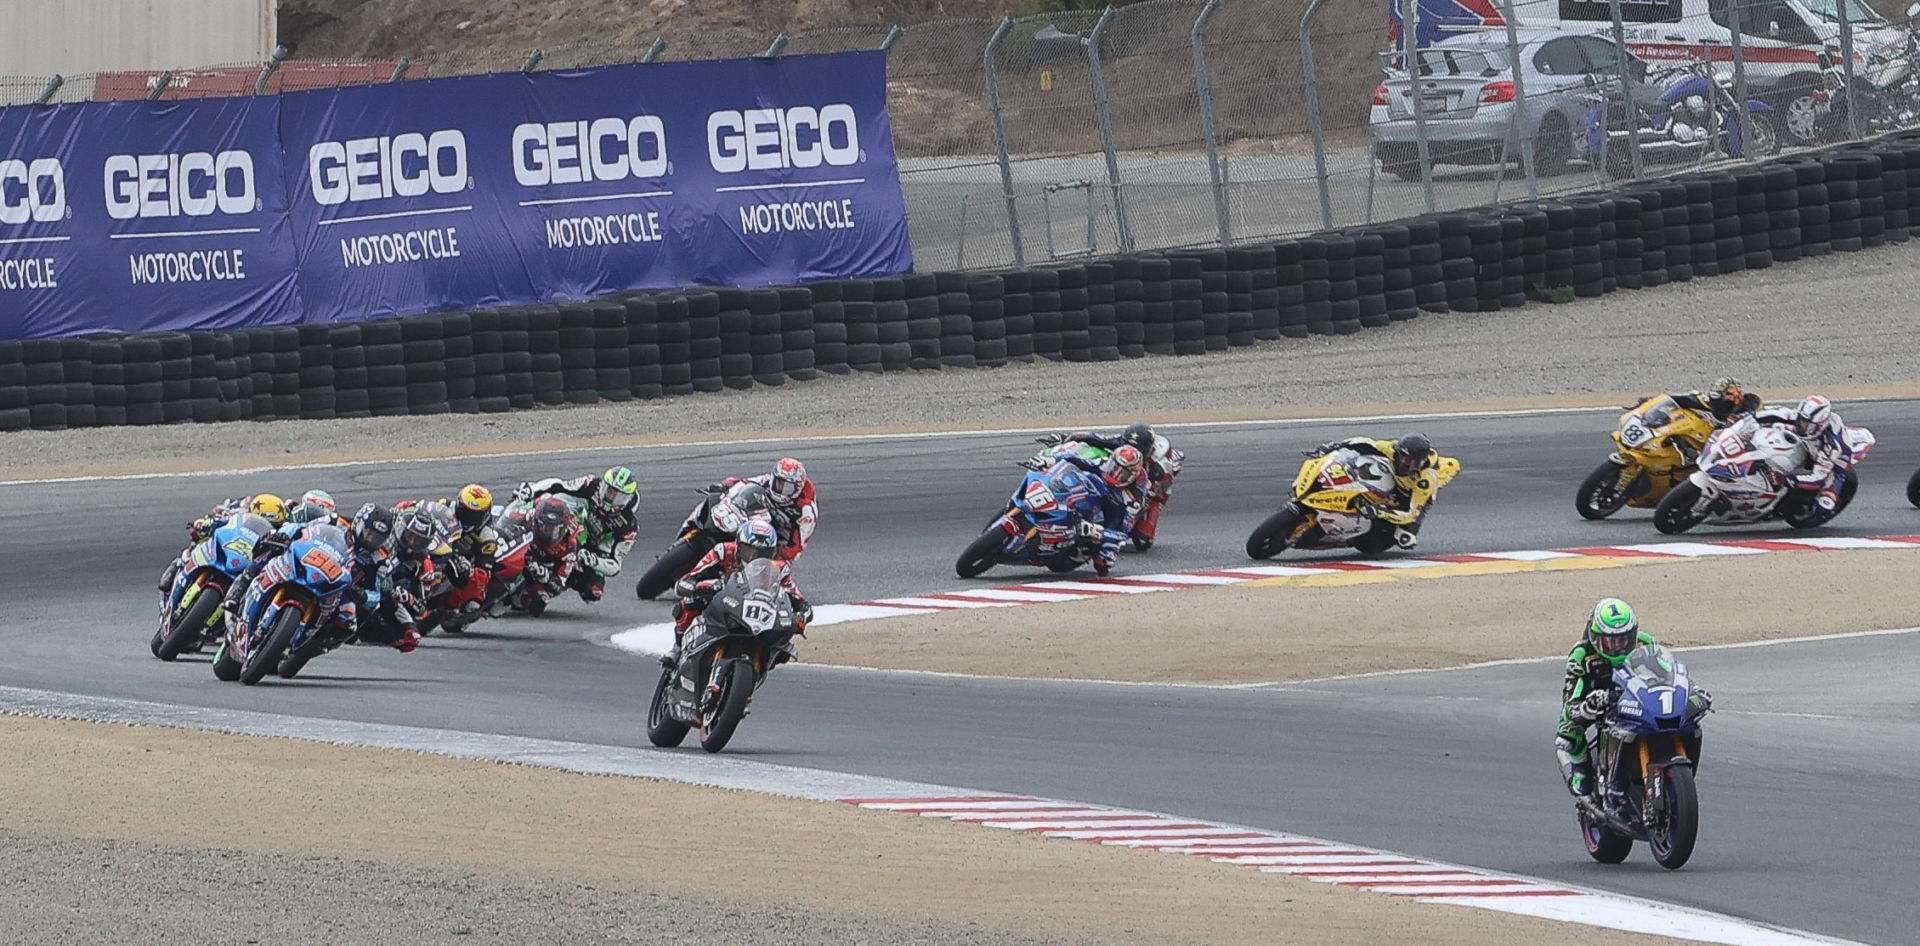 In addition to being an official partner of the MotoAmerica Championship, GEICO will also be the title sponsor of the GEICO Motorcycle Speedfest Of Monterey, July 9-11 at WeatherTech Raceway Laguna Seca. Photo by Brian J. Nelson, courtesy MotoAmerica.